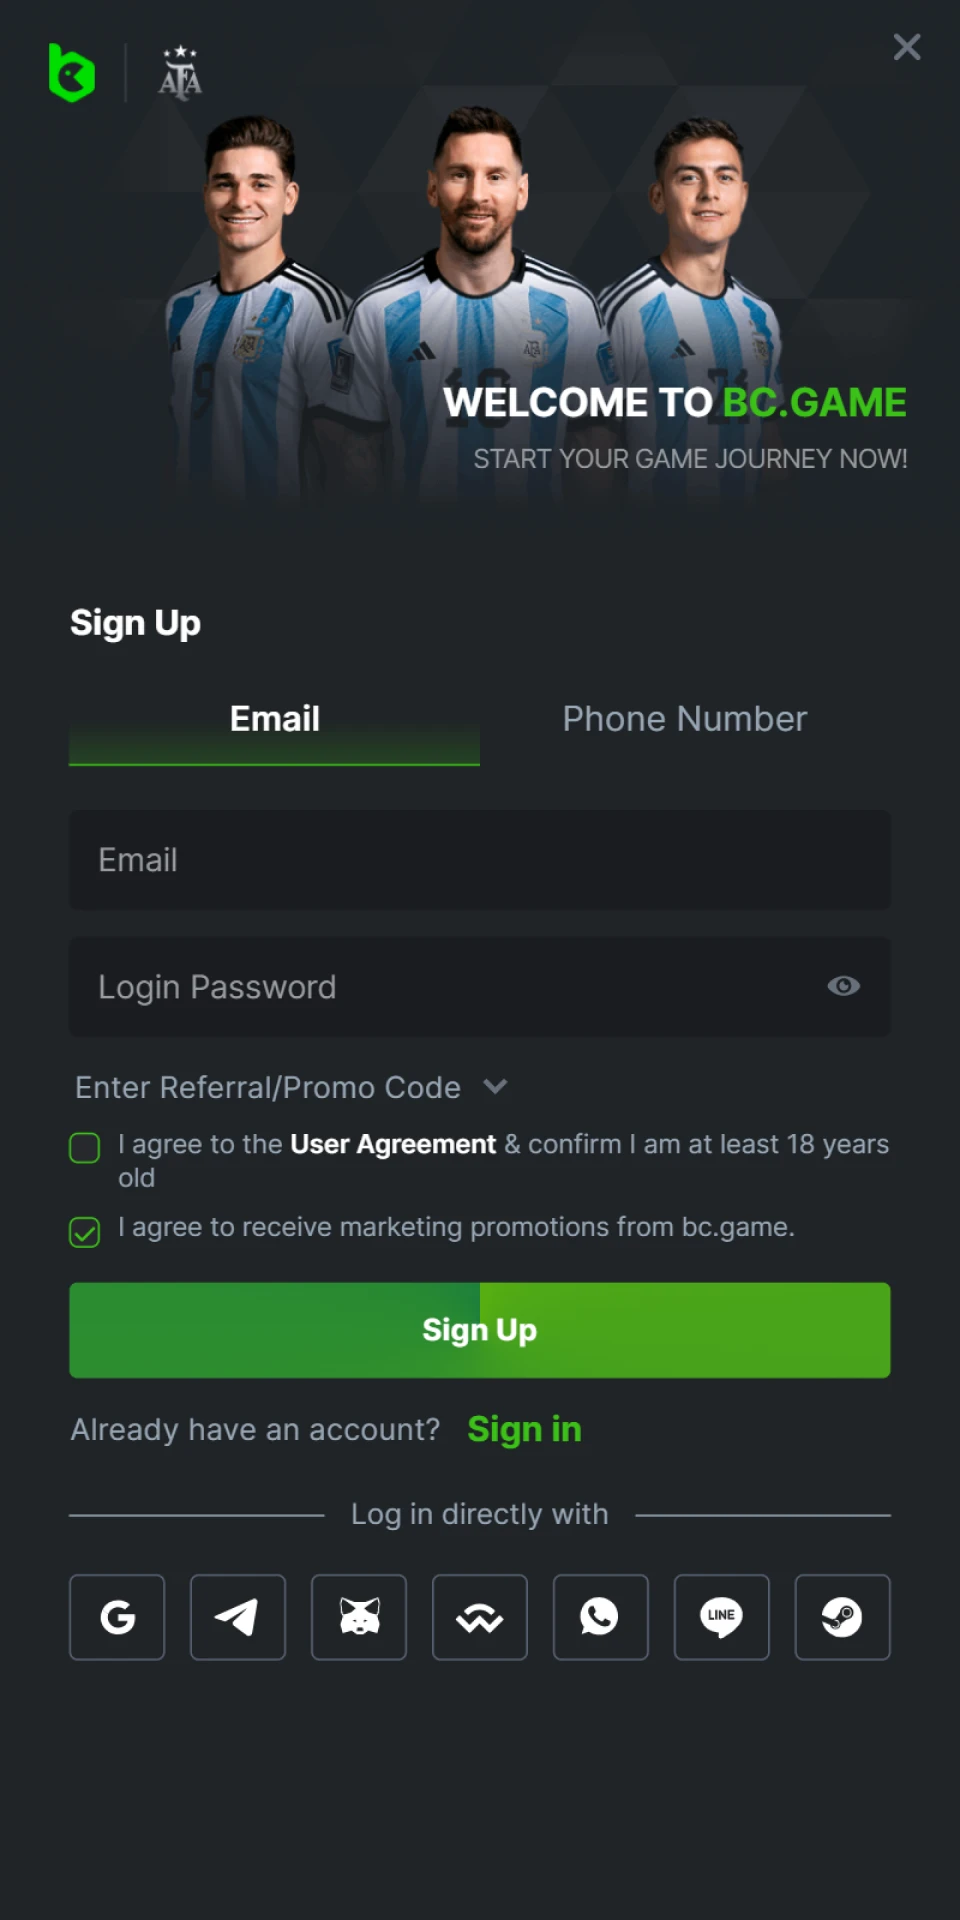 The BC Game app has easy registration.